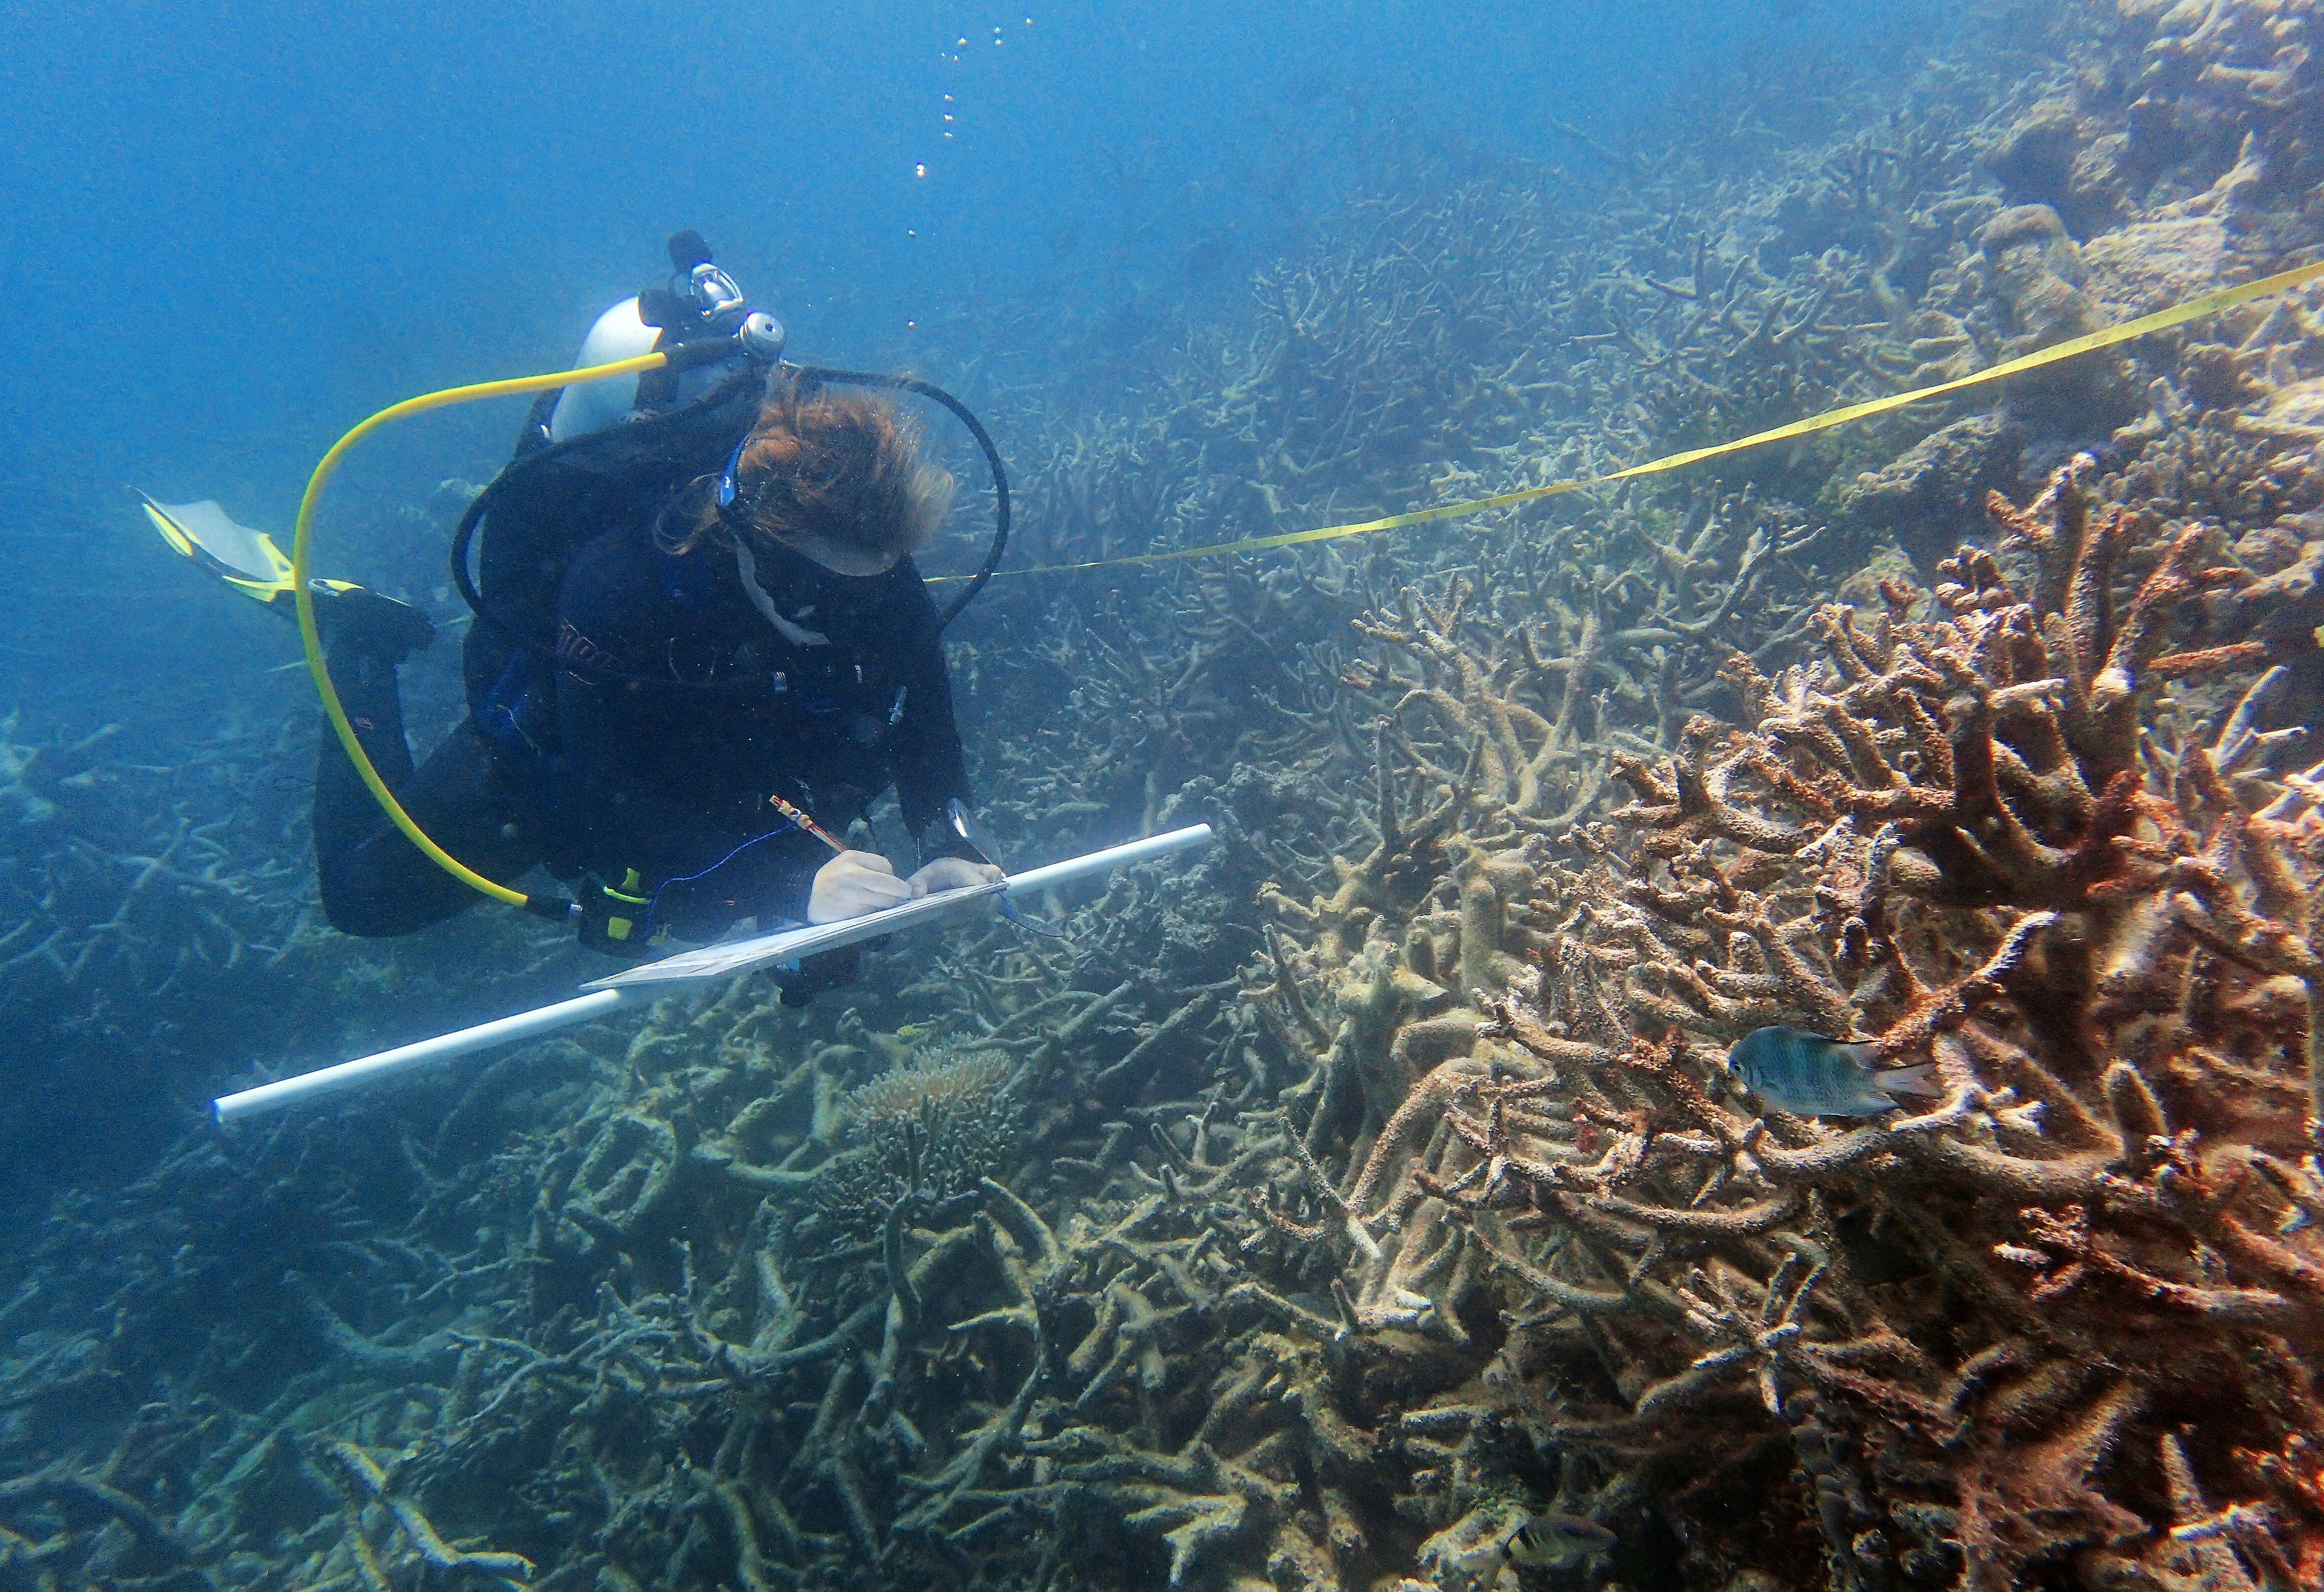 An undated handout photo received from the Australian Research Council Centre of Excellence for Coral Reef Studies on October 26, 2016 shows coral surveyor Margaux Hein swimming over a field of recently dead branching corals near Lizard Island. More corals are dying and others are succumbing to disease and predators after the worst-ever bleaching on Australia's iconic Great Barrier Reef, scientists said on October 26. / AFP PHOTO / Australian Research Council Centre of Excellence for Coral Reef Studies / Greg Torda / RESTRICTED TO EDITORIAL USE - MANDATORY CREDIT "AFP PHOTO / AUSTRALIAN RESEARCH COUNCIL CENTRE OF EXCELLENCE FOR CORAL REEF STUDIES / Greg TORDA" - NO MARKETING NO ADVERTISING CAMPAIGNS - DISTRIBUTED AS A SERVICE TO CLIENTS - NO ARCHIVES